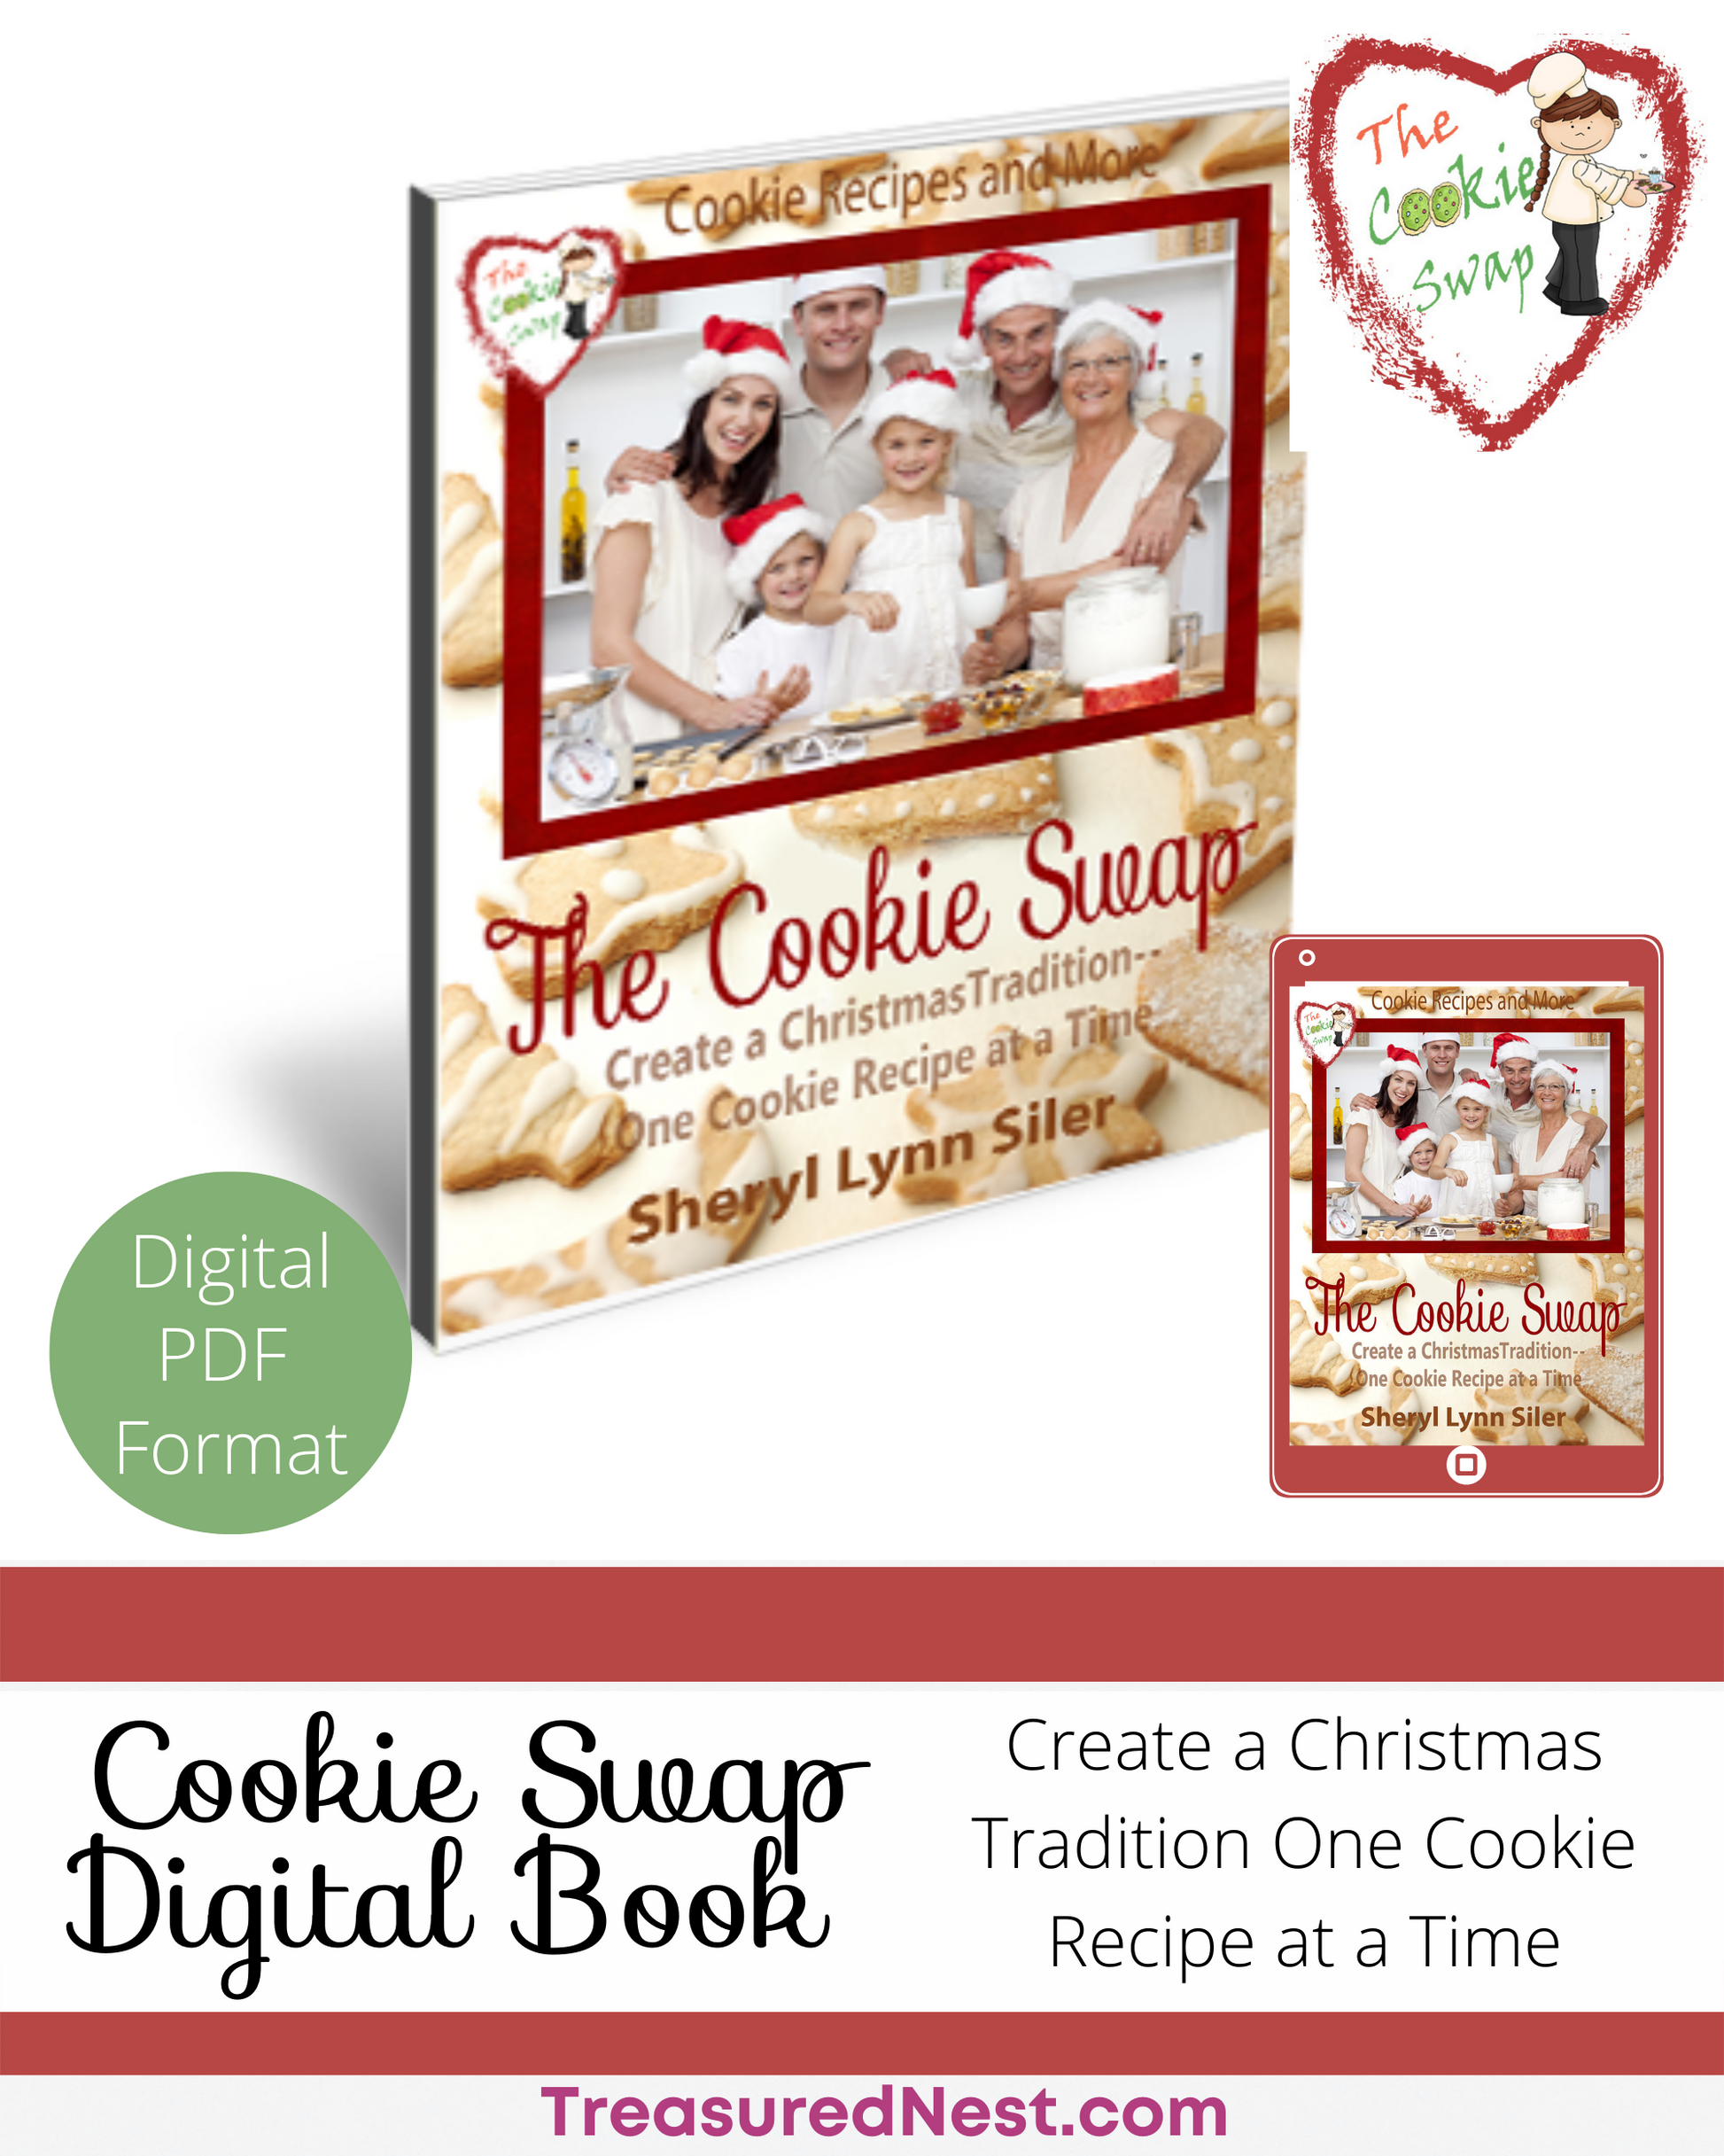 The Cook Swap - Create a Christmas Tradition One Cookie Recipe at a Time Digital Book